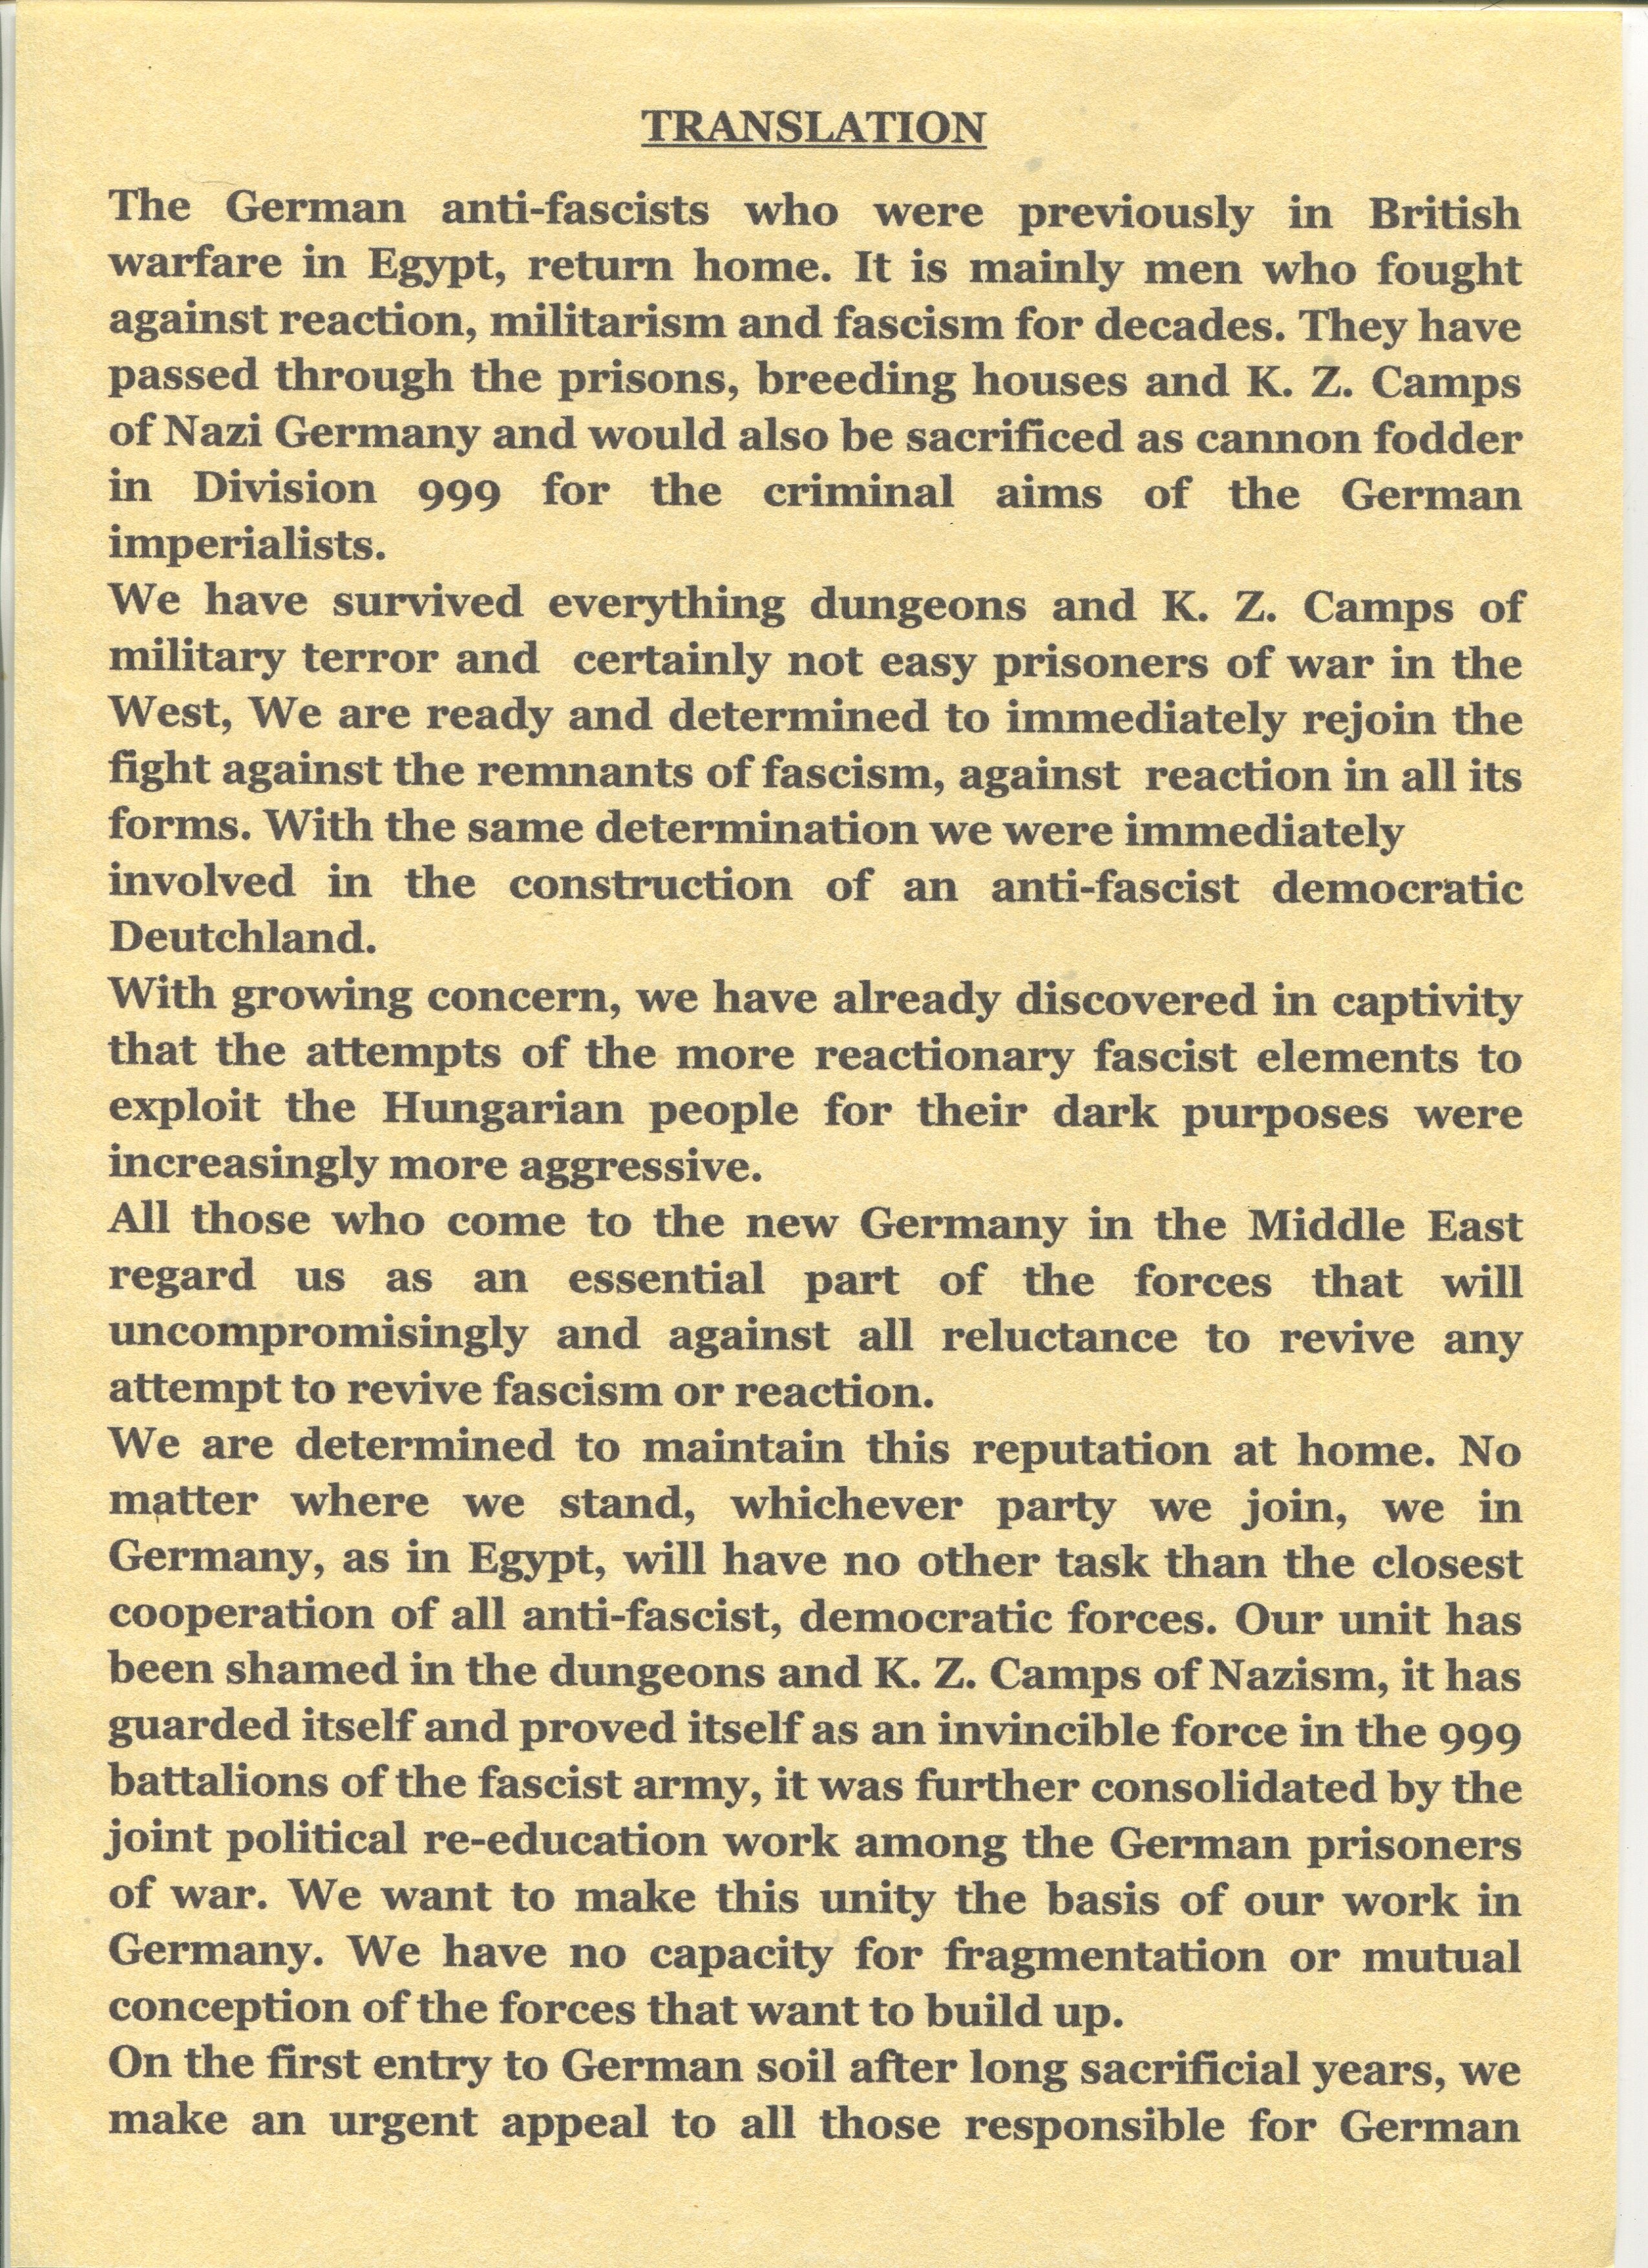 1946 ORIGINAL LETTER MIDDLE EAST PW CAMP 380 GERMAN ANTI-FASCIST SUPPLIED WITH HISTORICAL DETAILS - Image 2 of 6